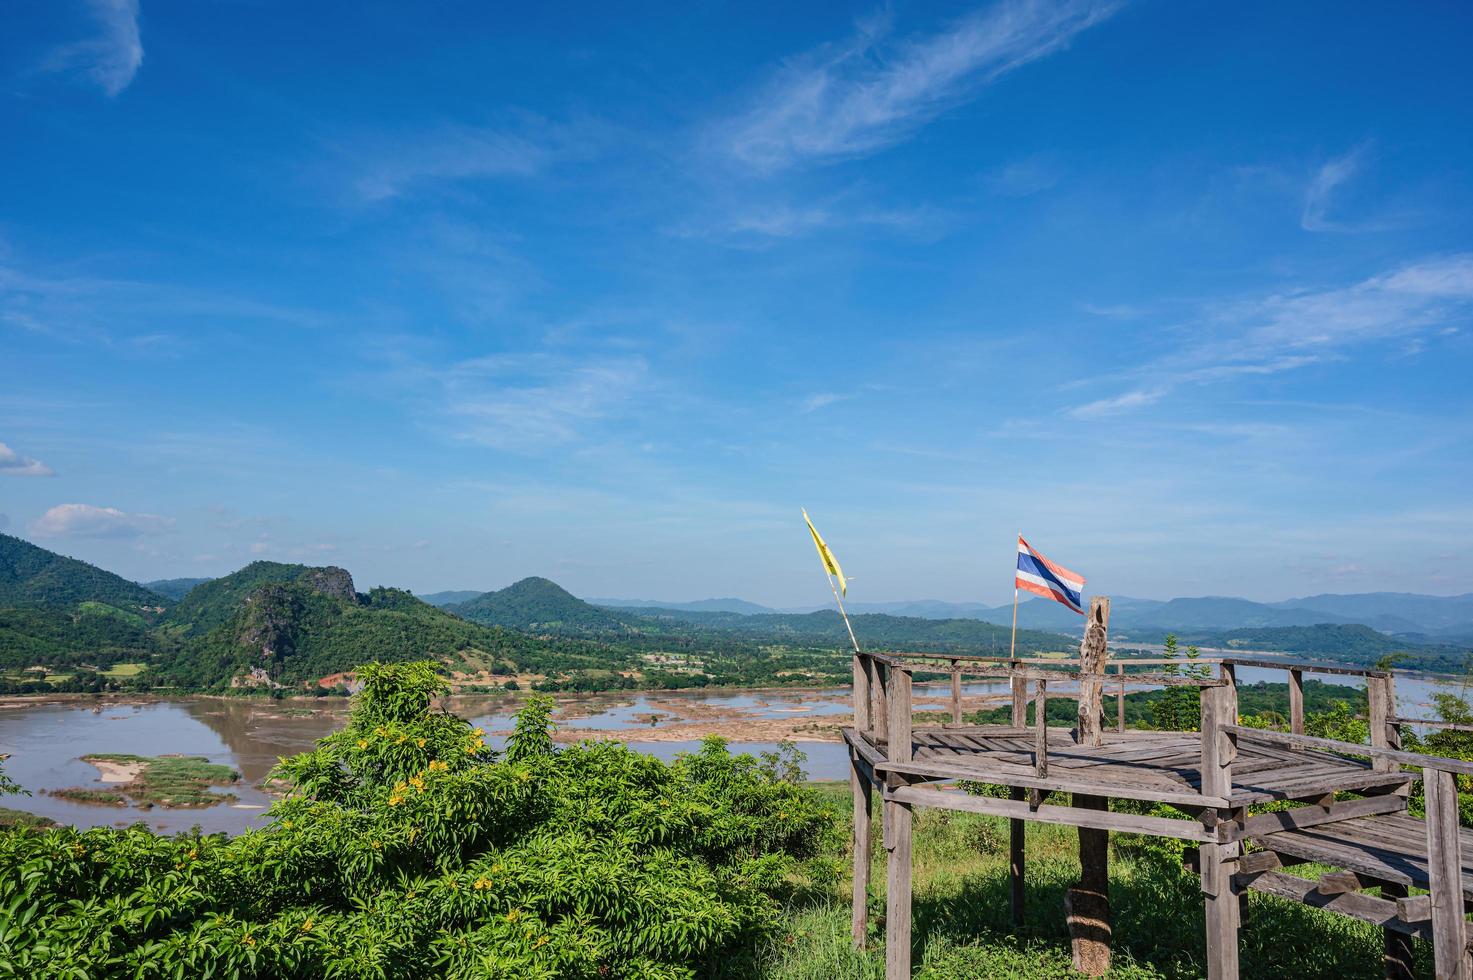 Beautiful landscape view and wooden bridge on Phu Lamduan at loei thailand.Phu Lamduan is a new tourist attraction and viewpoint of mekong river between thailand and loas. photo